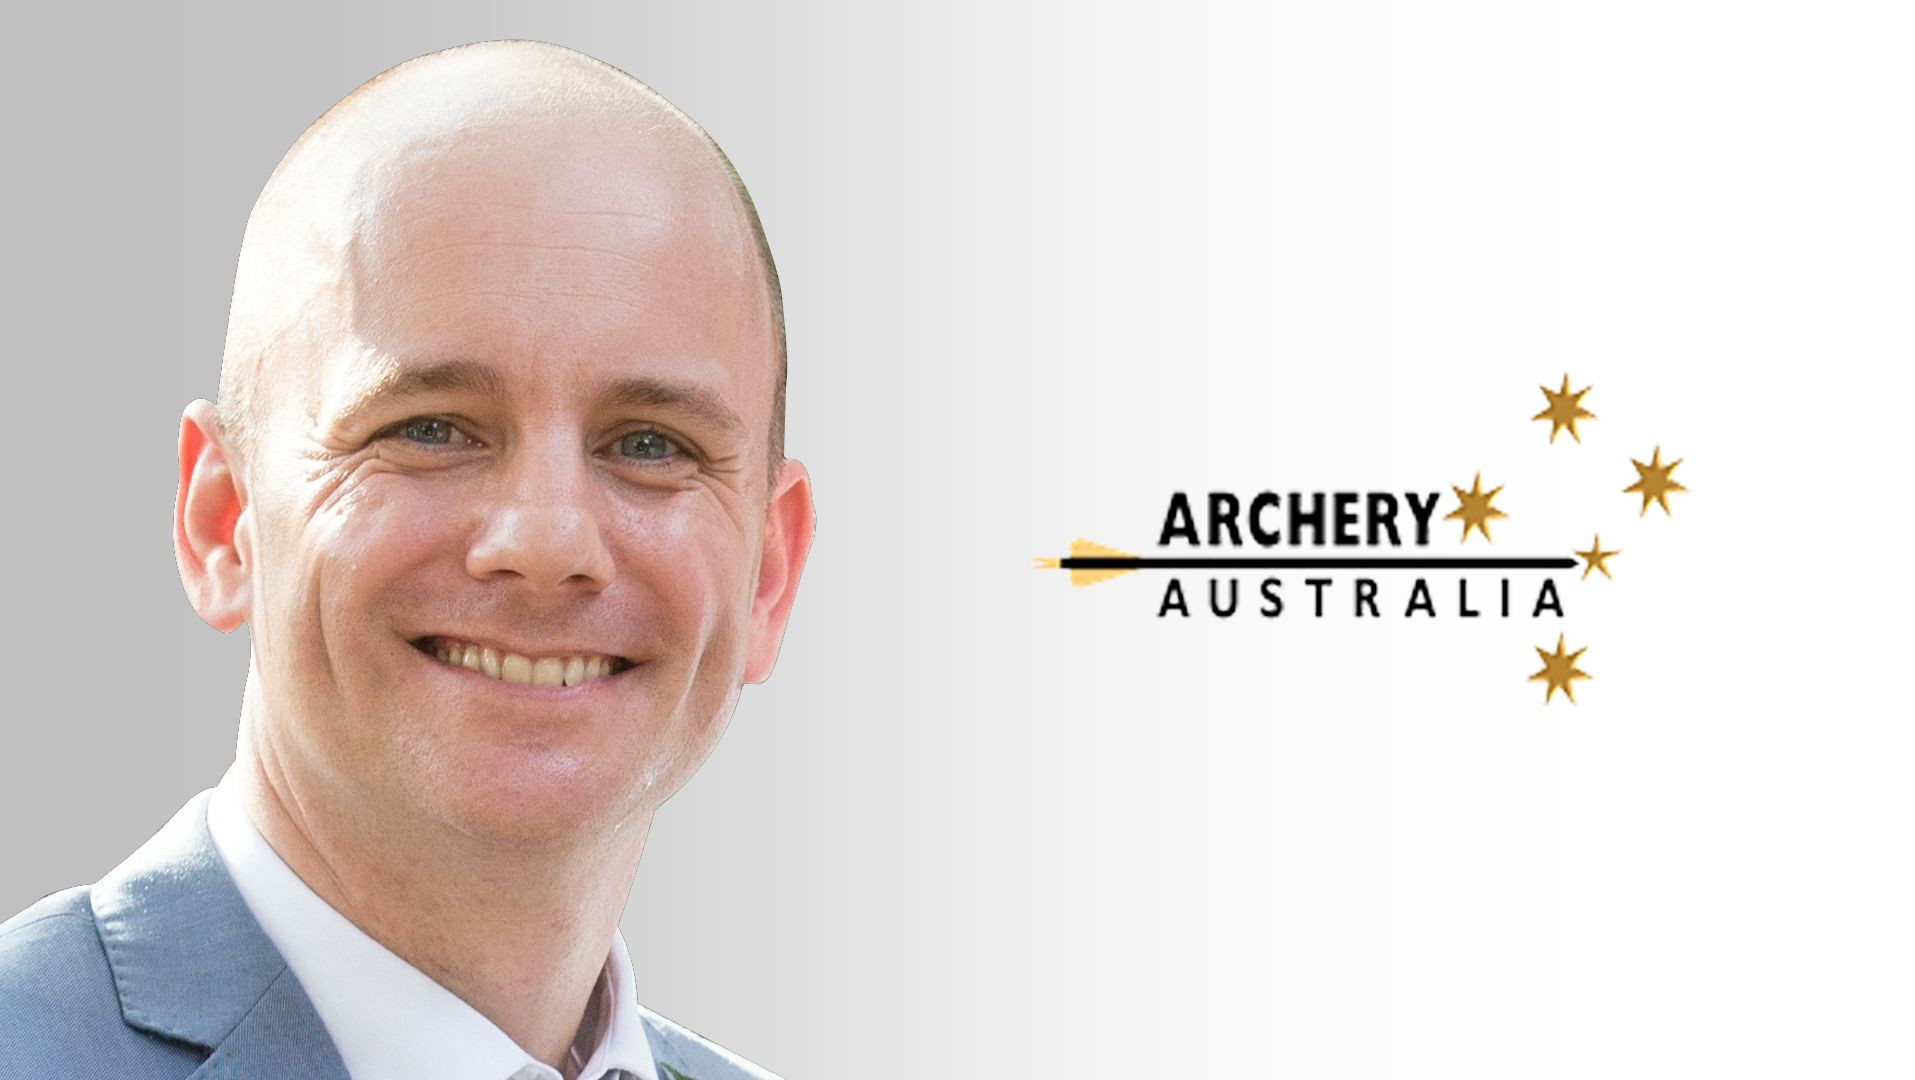 Australian Archery appoints new chief executive